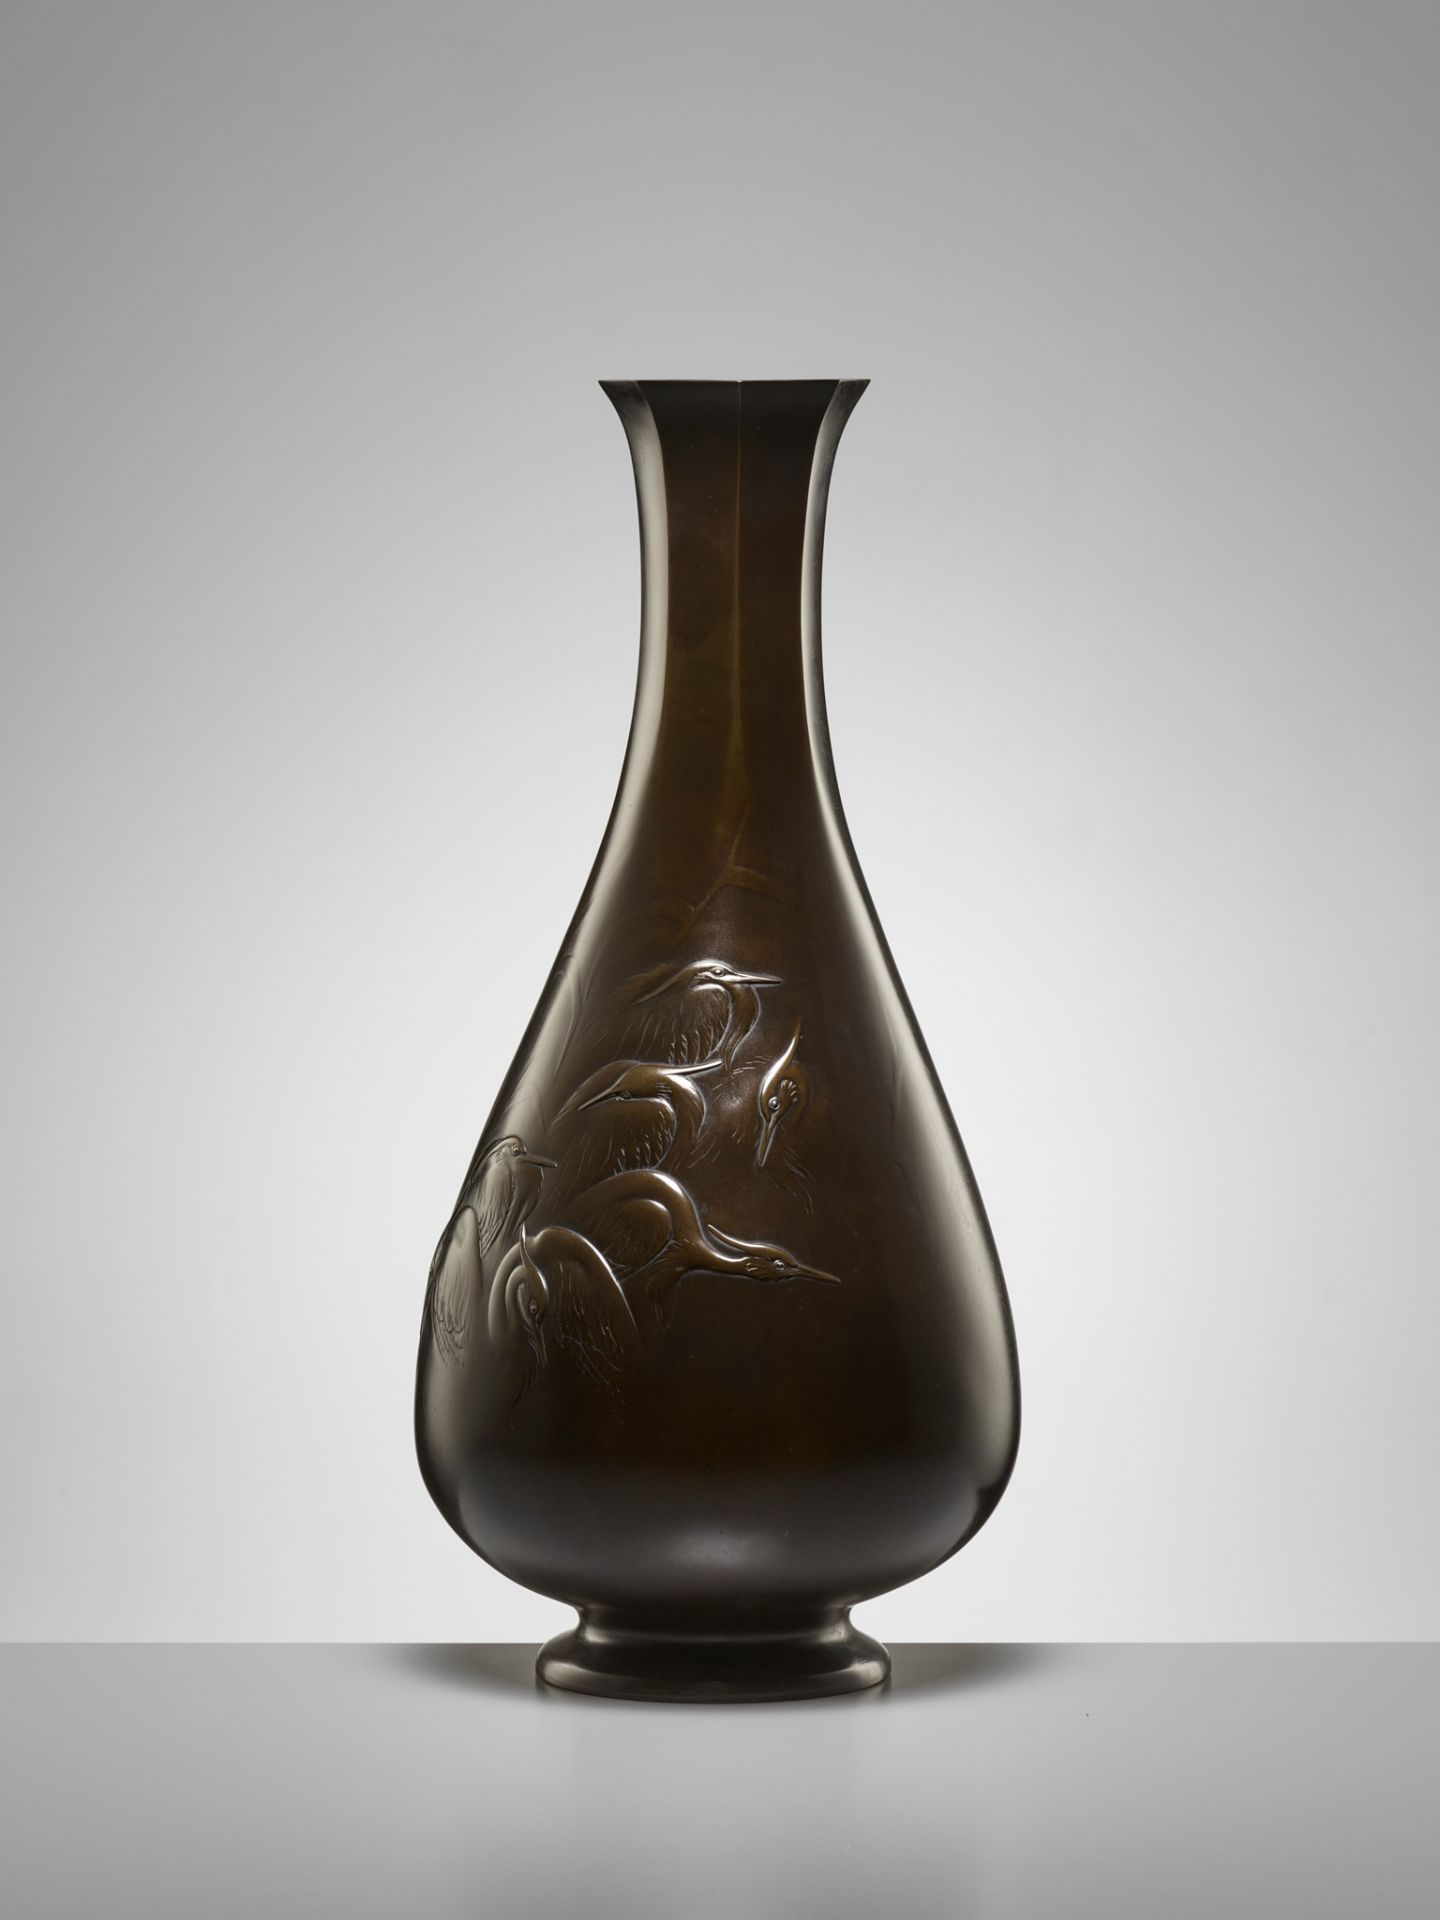 HIDEMITSU: A SUPERB AND LARGE BRONZE VASE DEPICTING HERONS AND LOTUS - Image 4 of 10